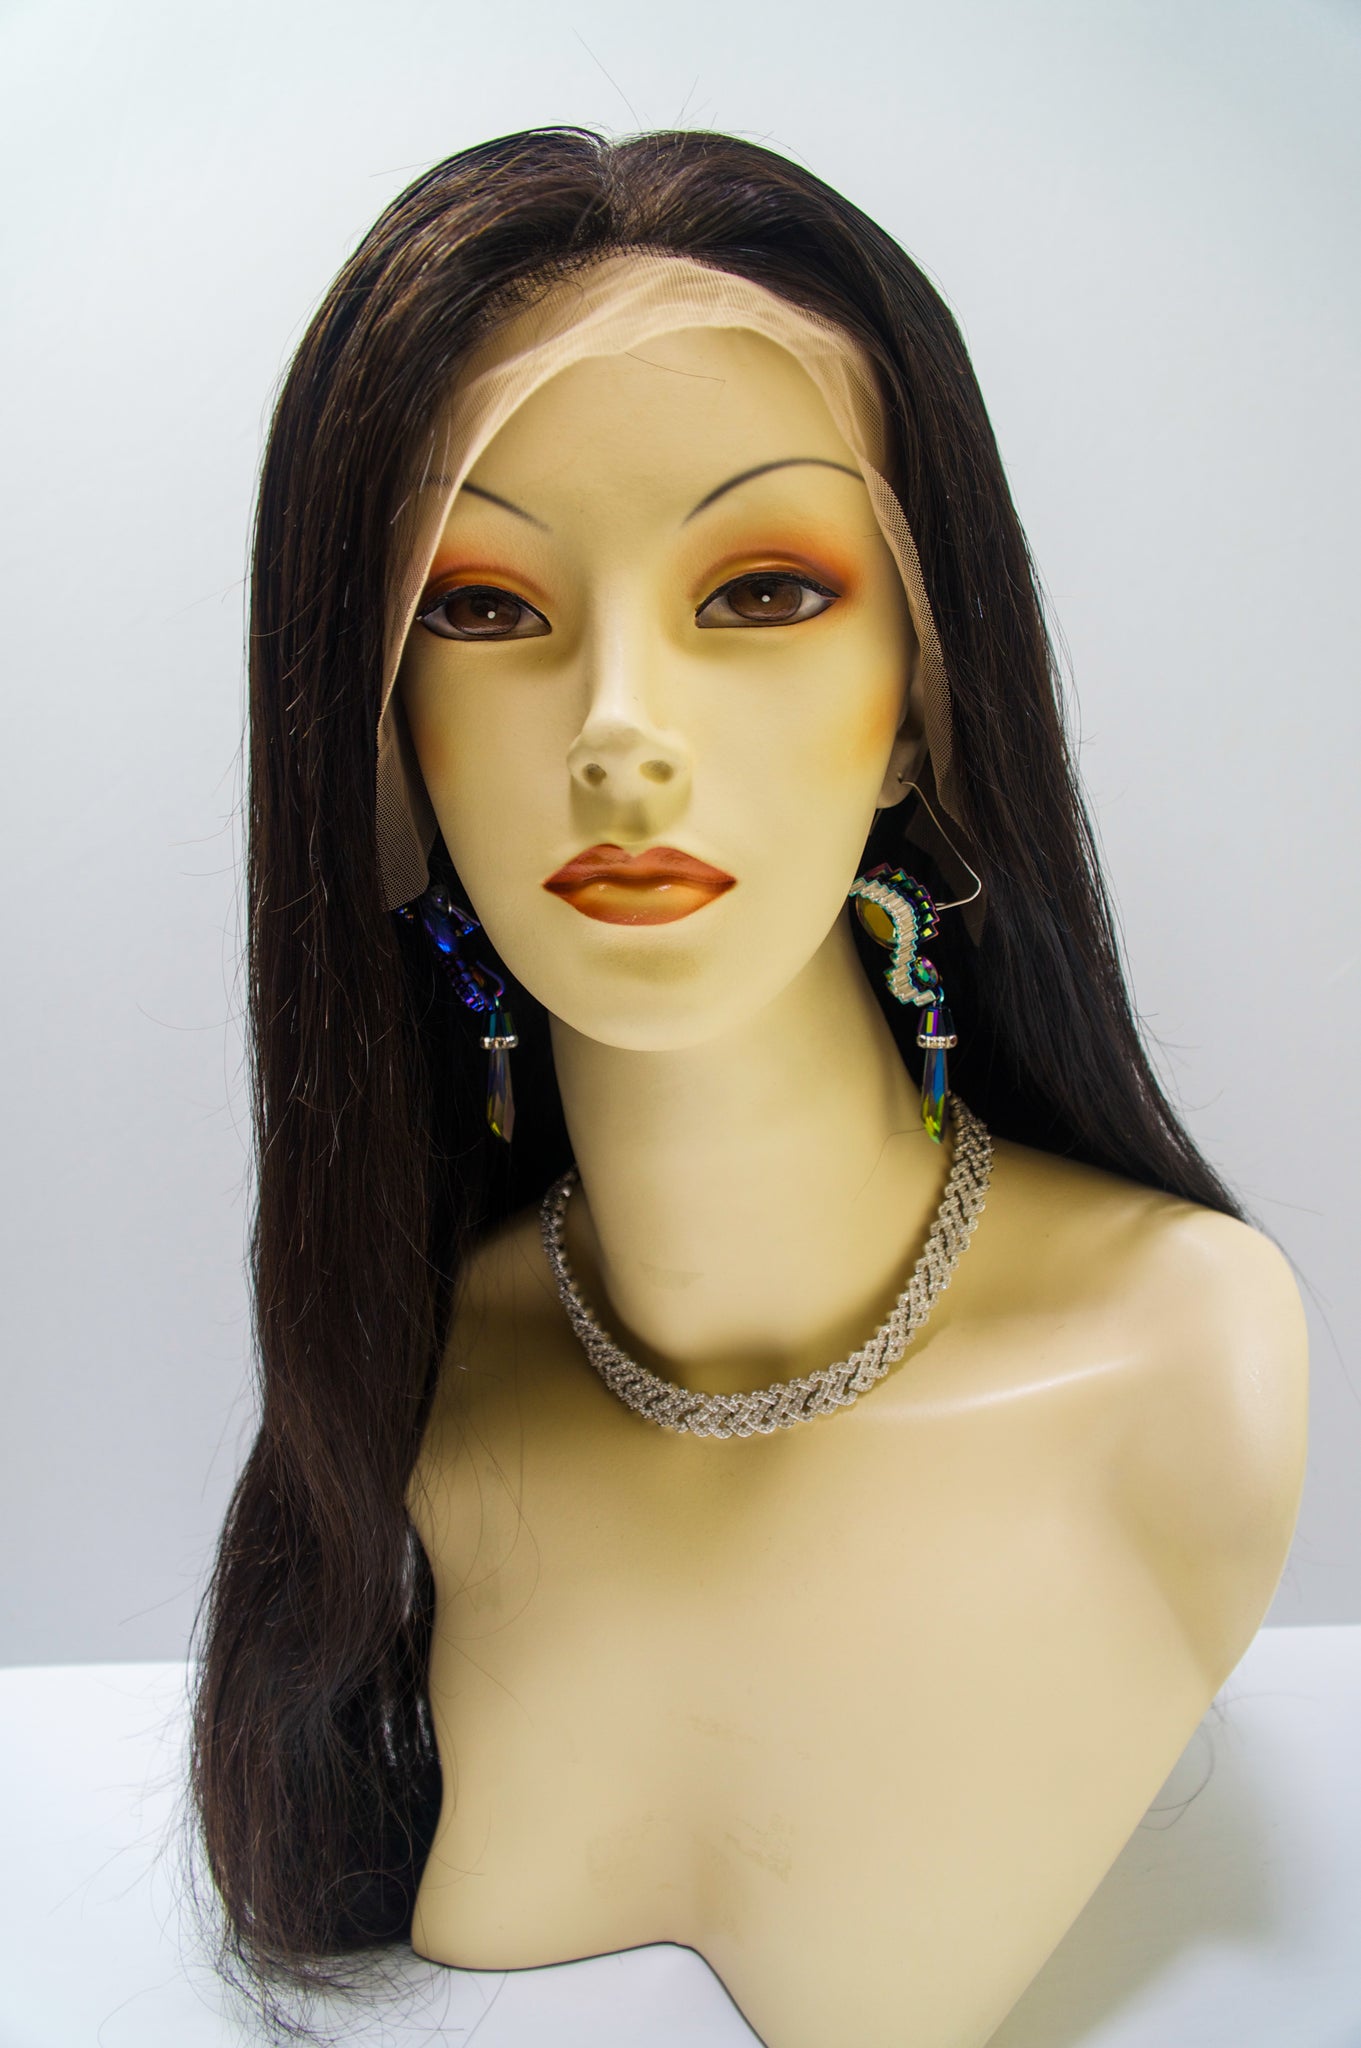 Virgin Cuticle Straight - Lace Front Wig